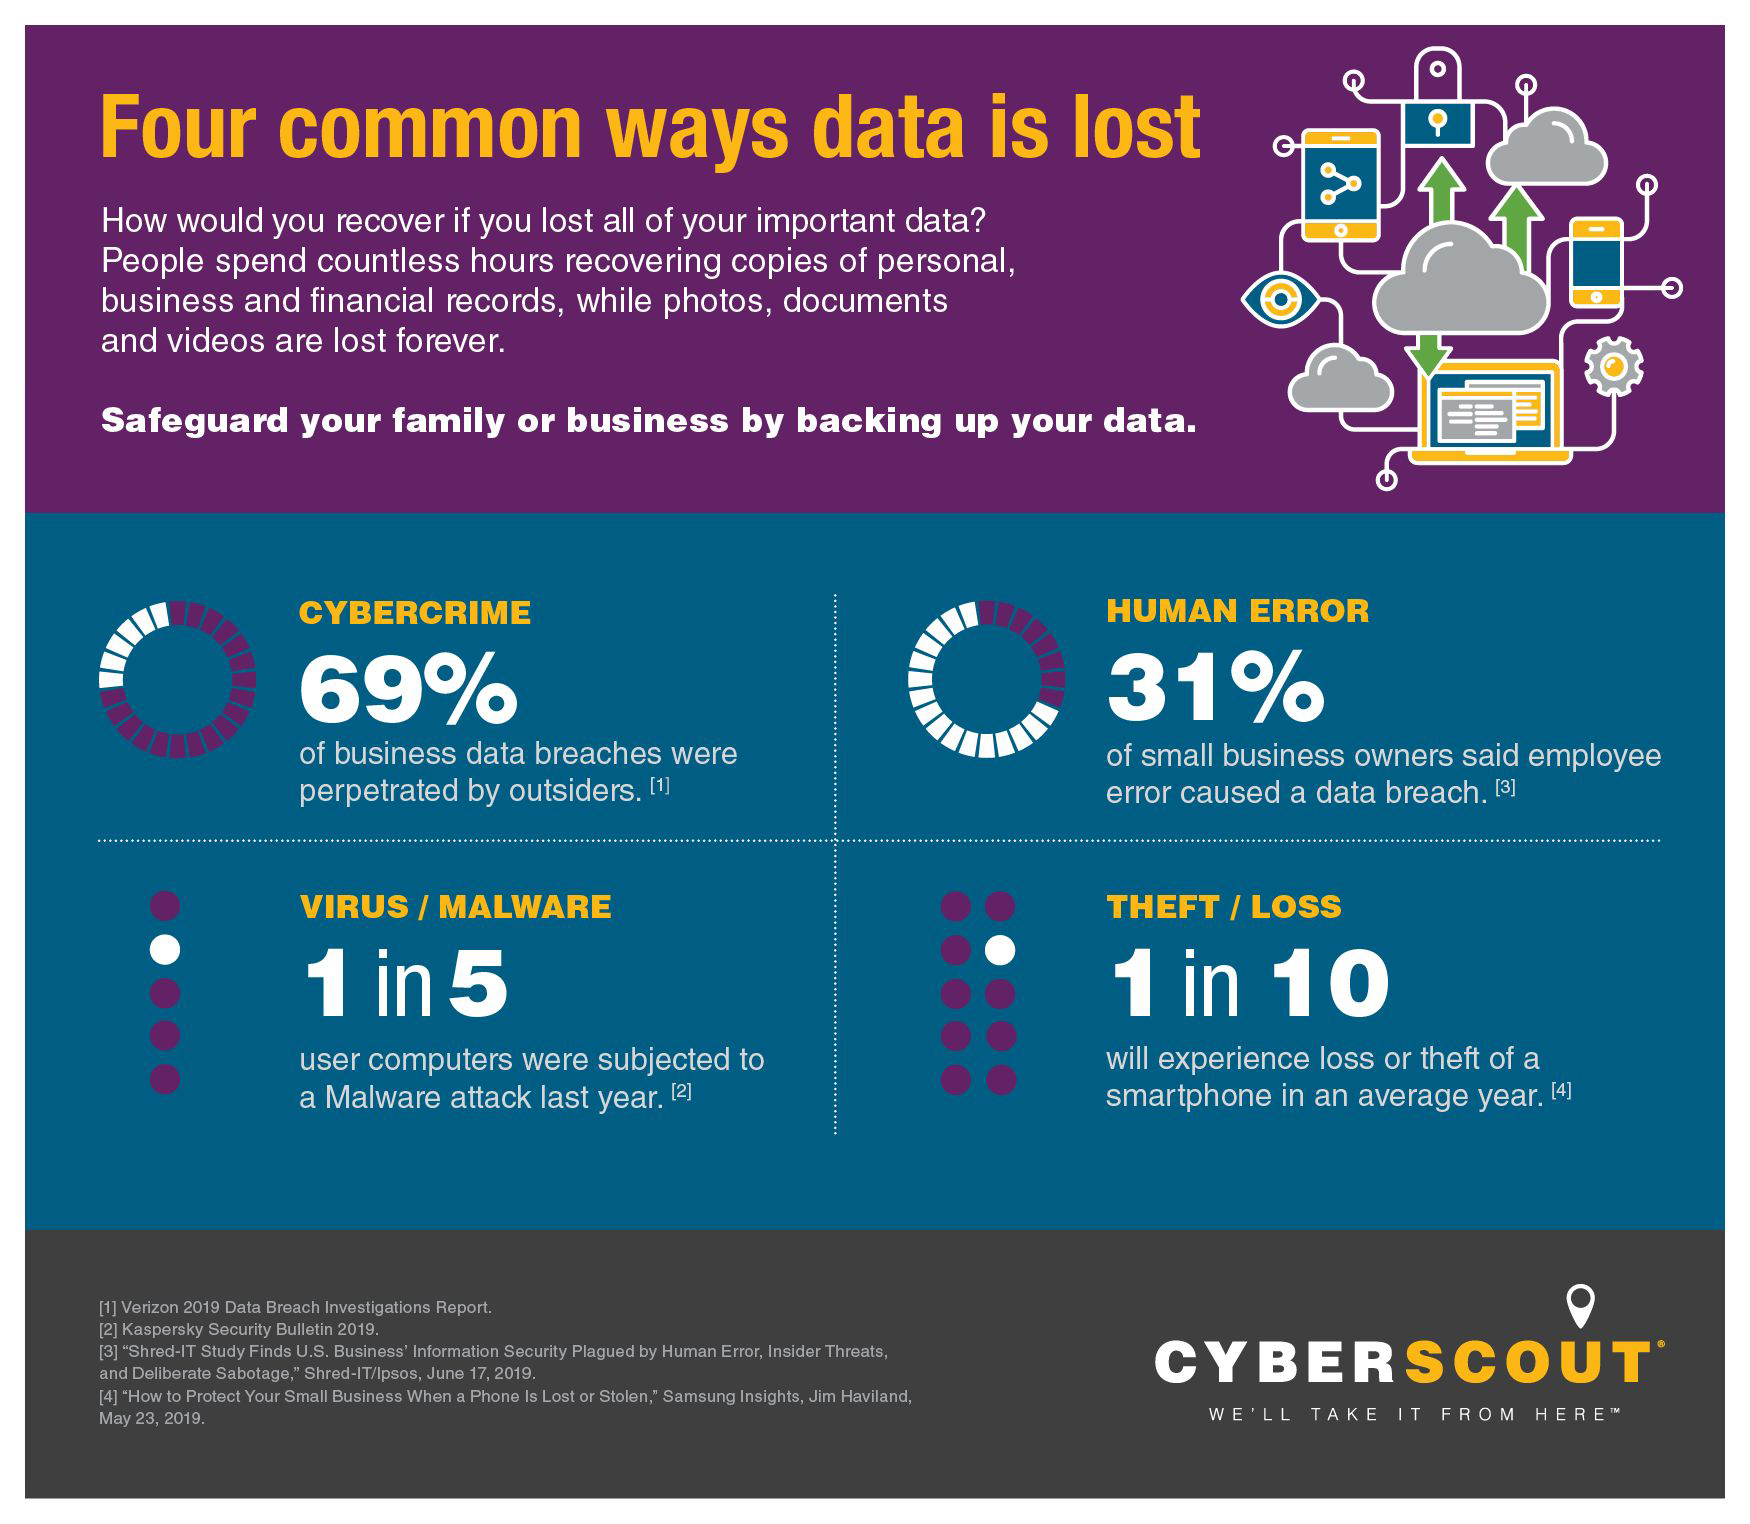 What happens if data is lost?